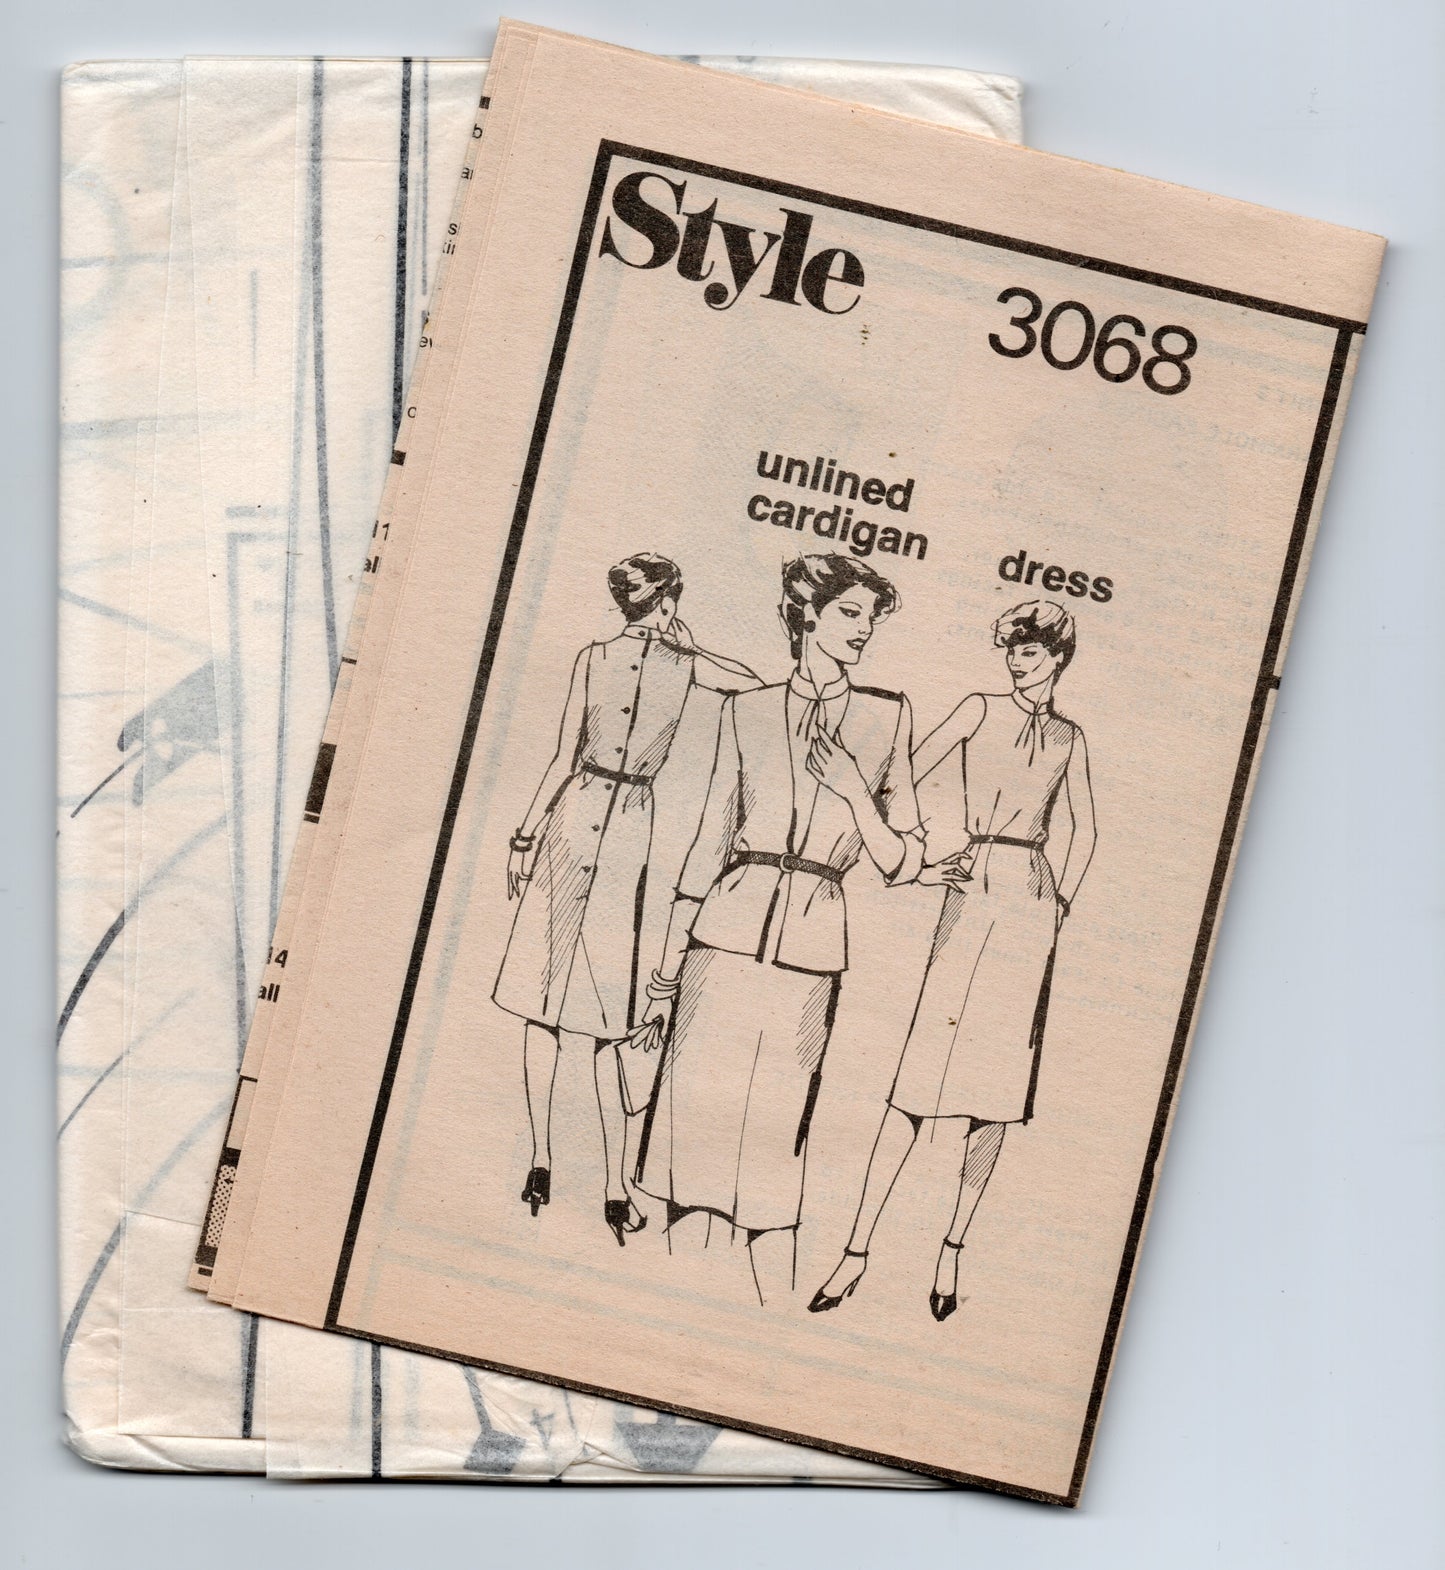 Style 3068 Womens Back Buttoned Dress & Cardigan Jacket 1980s Vintage Sewing Pattern Size 18 Bust 40 inches UNCUT Factory Folded